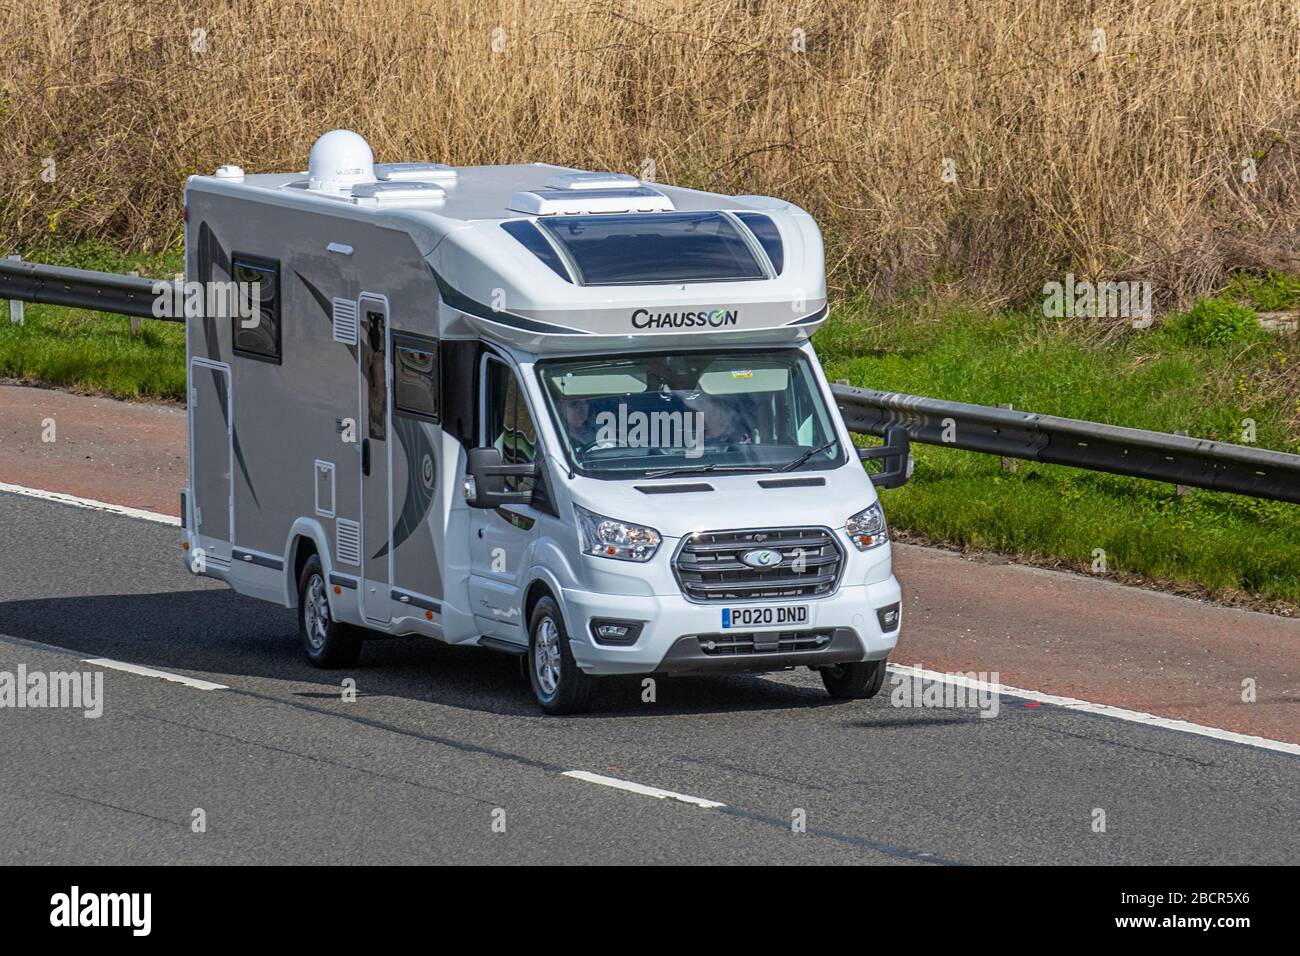 Chausson camper, Touring Caravans and Motorhomes, campervans, RV leisure  vehicle, family holidays, caravanette vacations, caravan holiday, life on  the road Stock Photo - Alamy